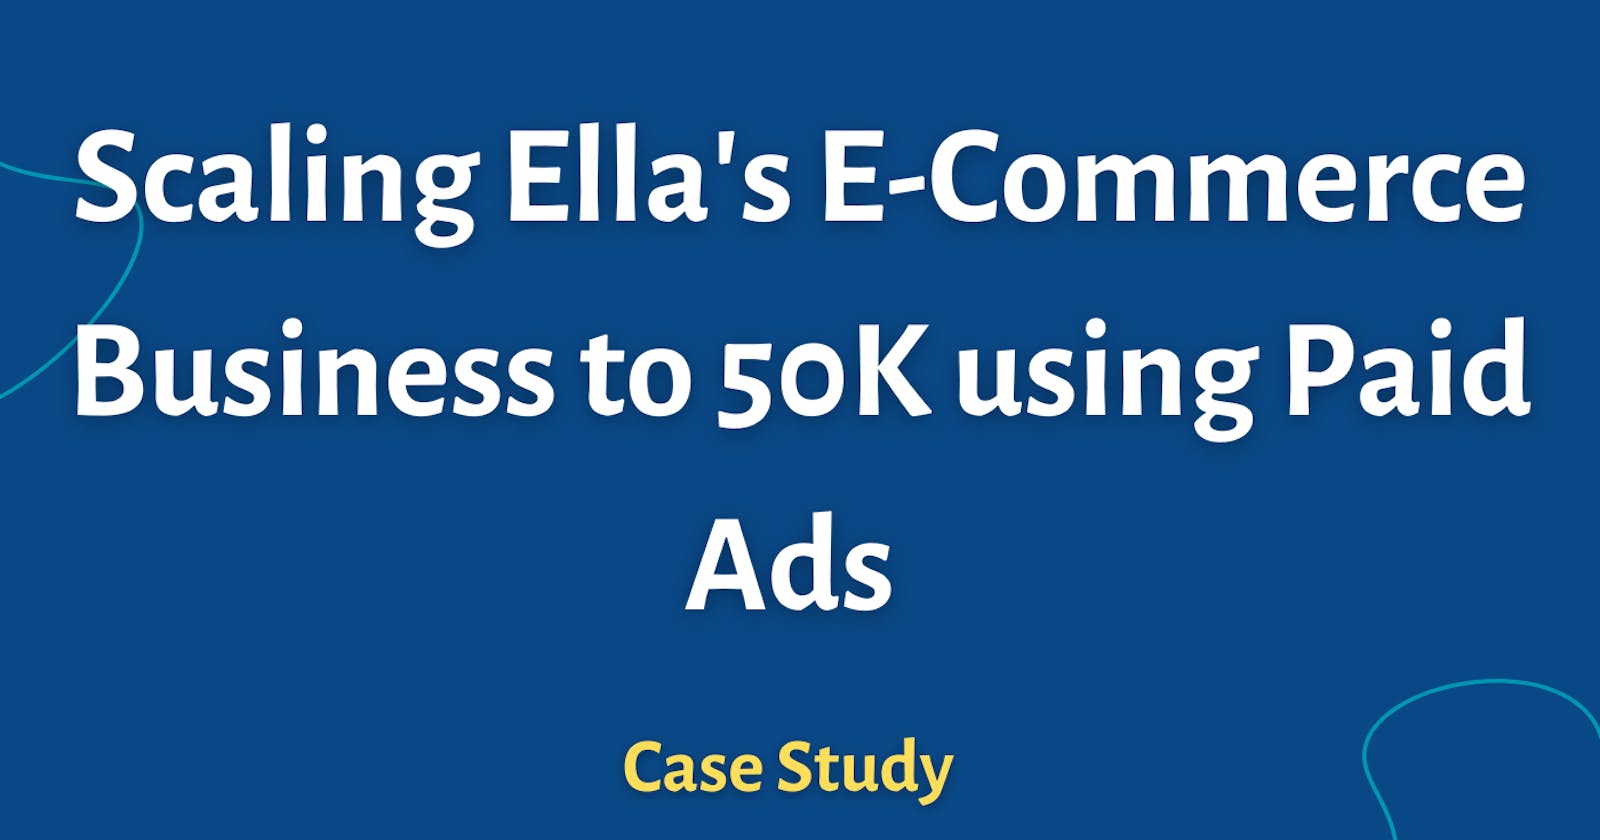 Scaling Ella's E-Commerce Business to 50K using Paid Ads [Case Study]